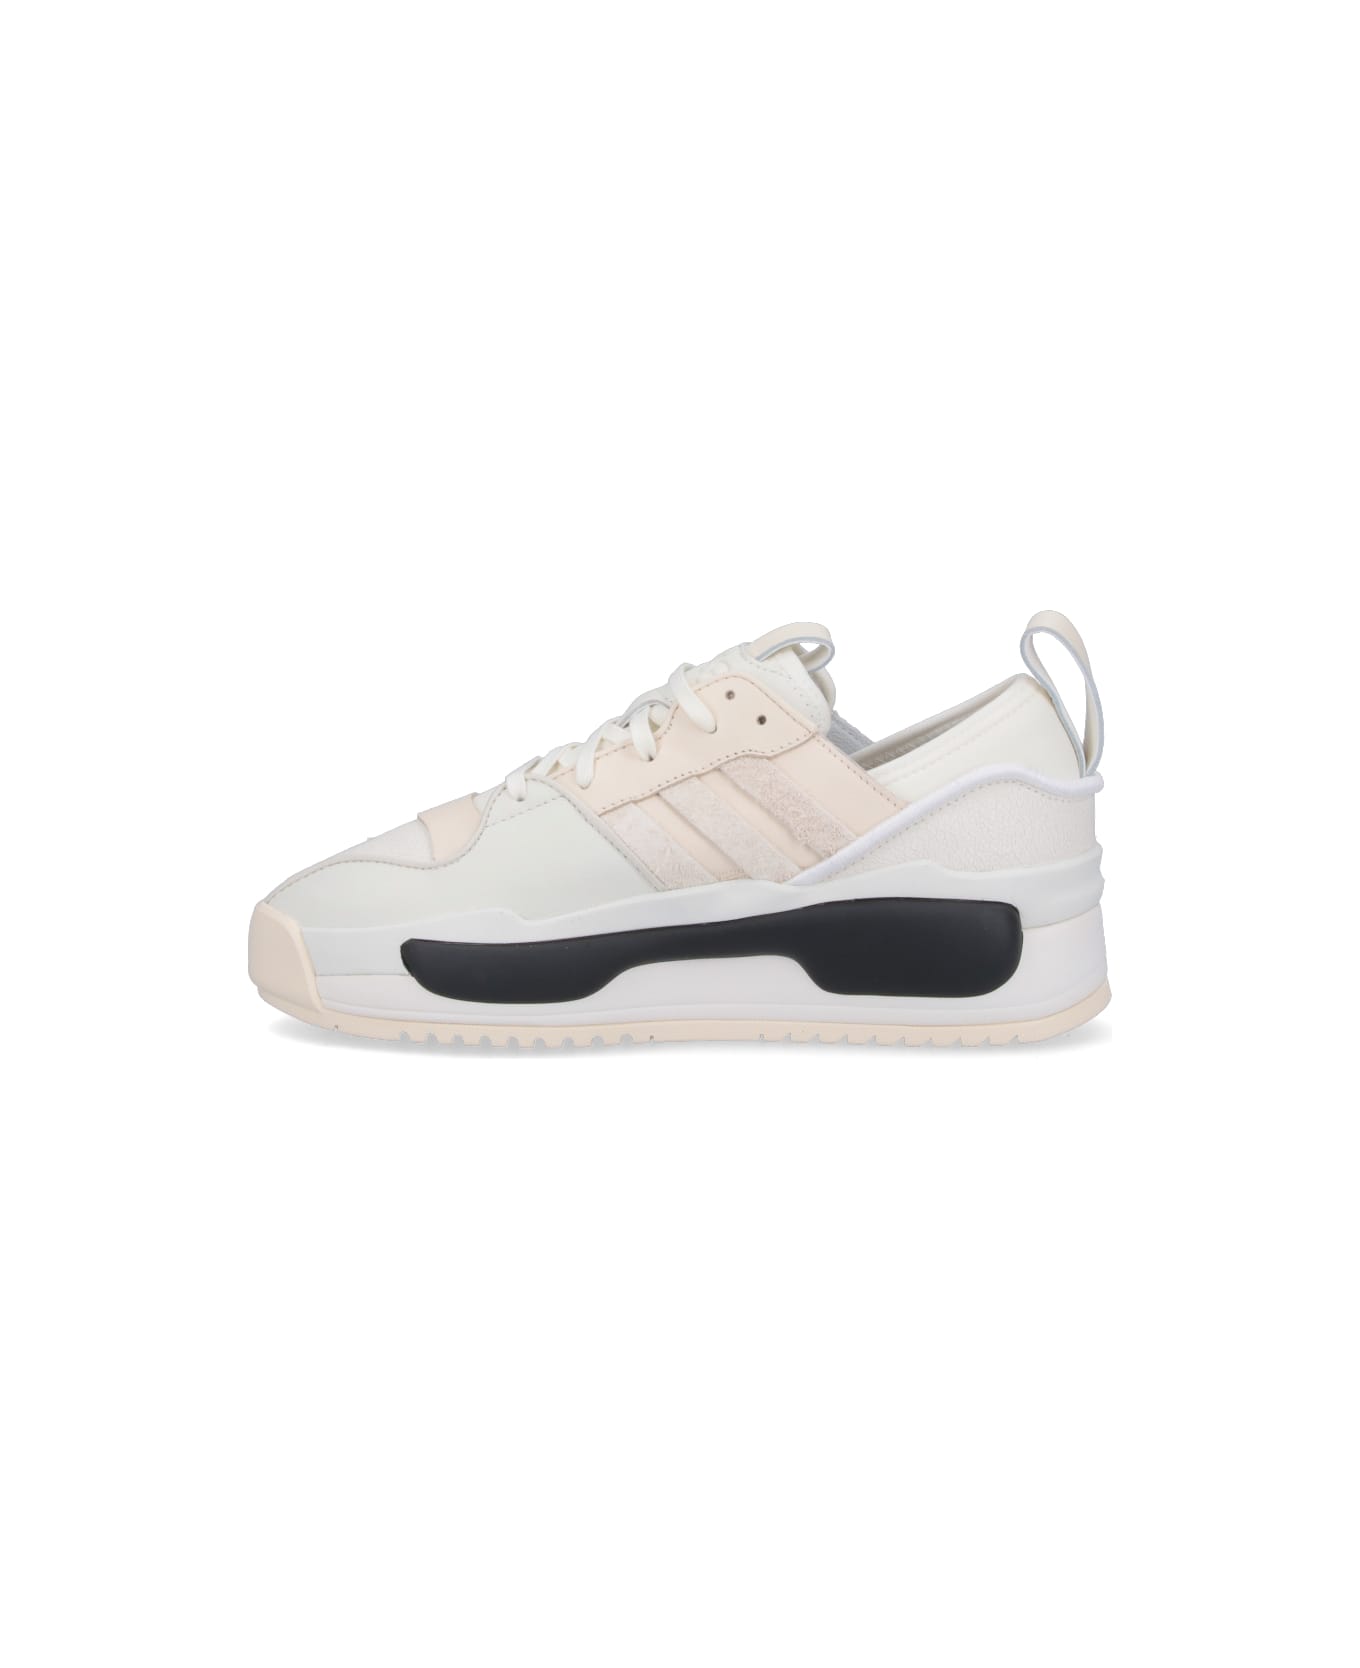 Y-3 'rivarly' Sneakers - White スニーカー